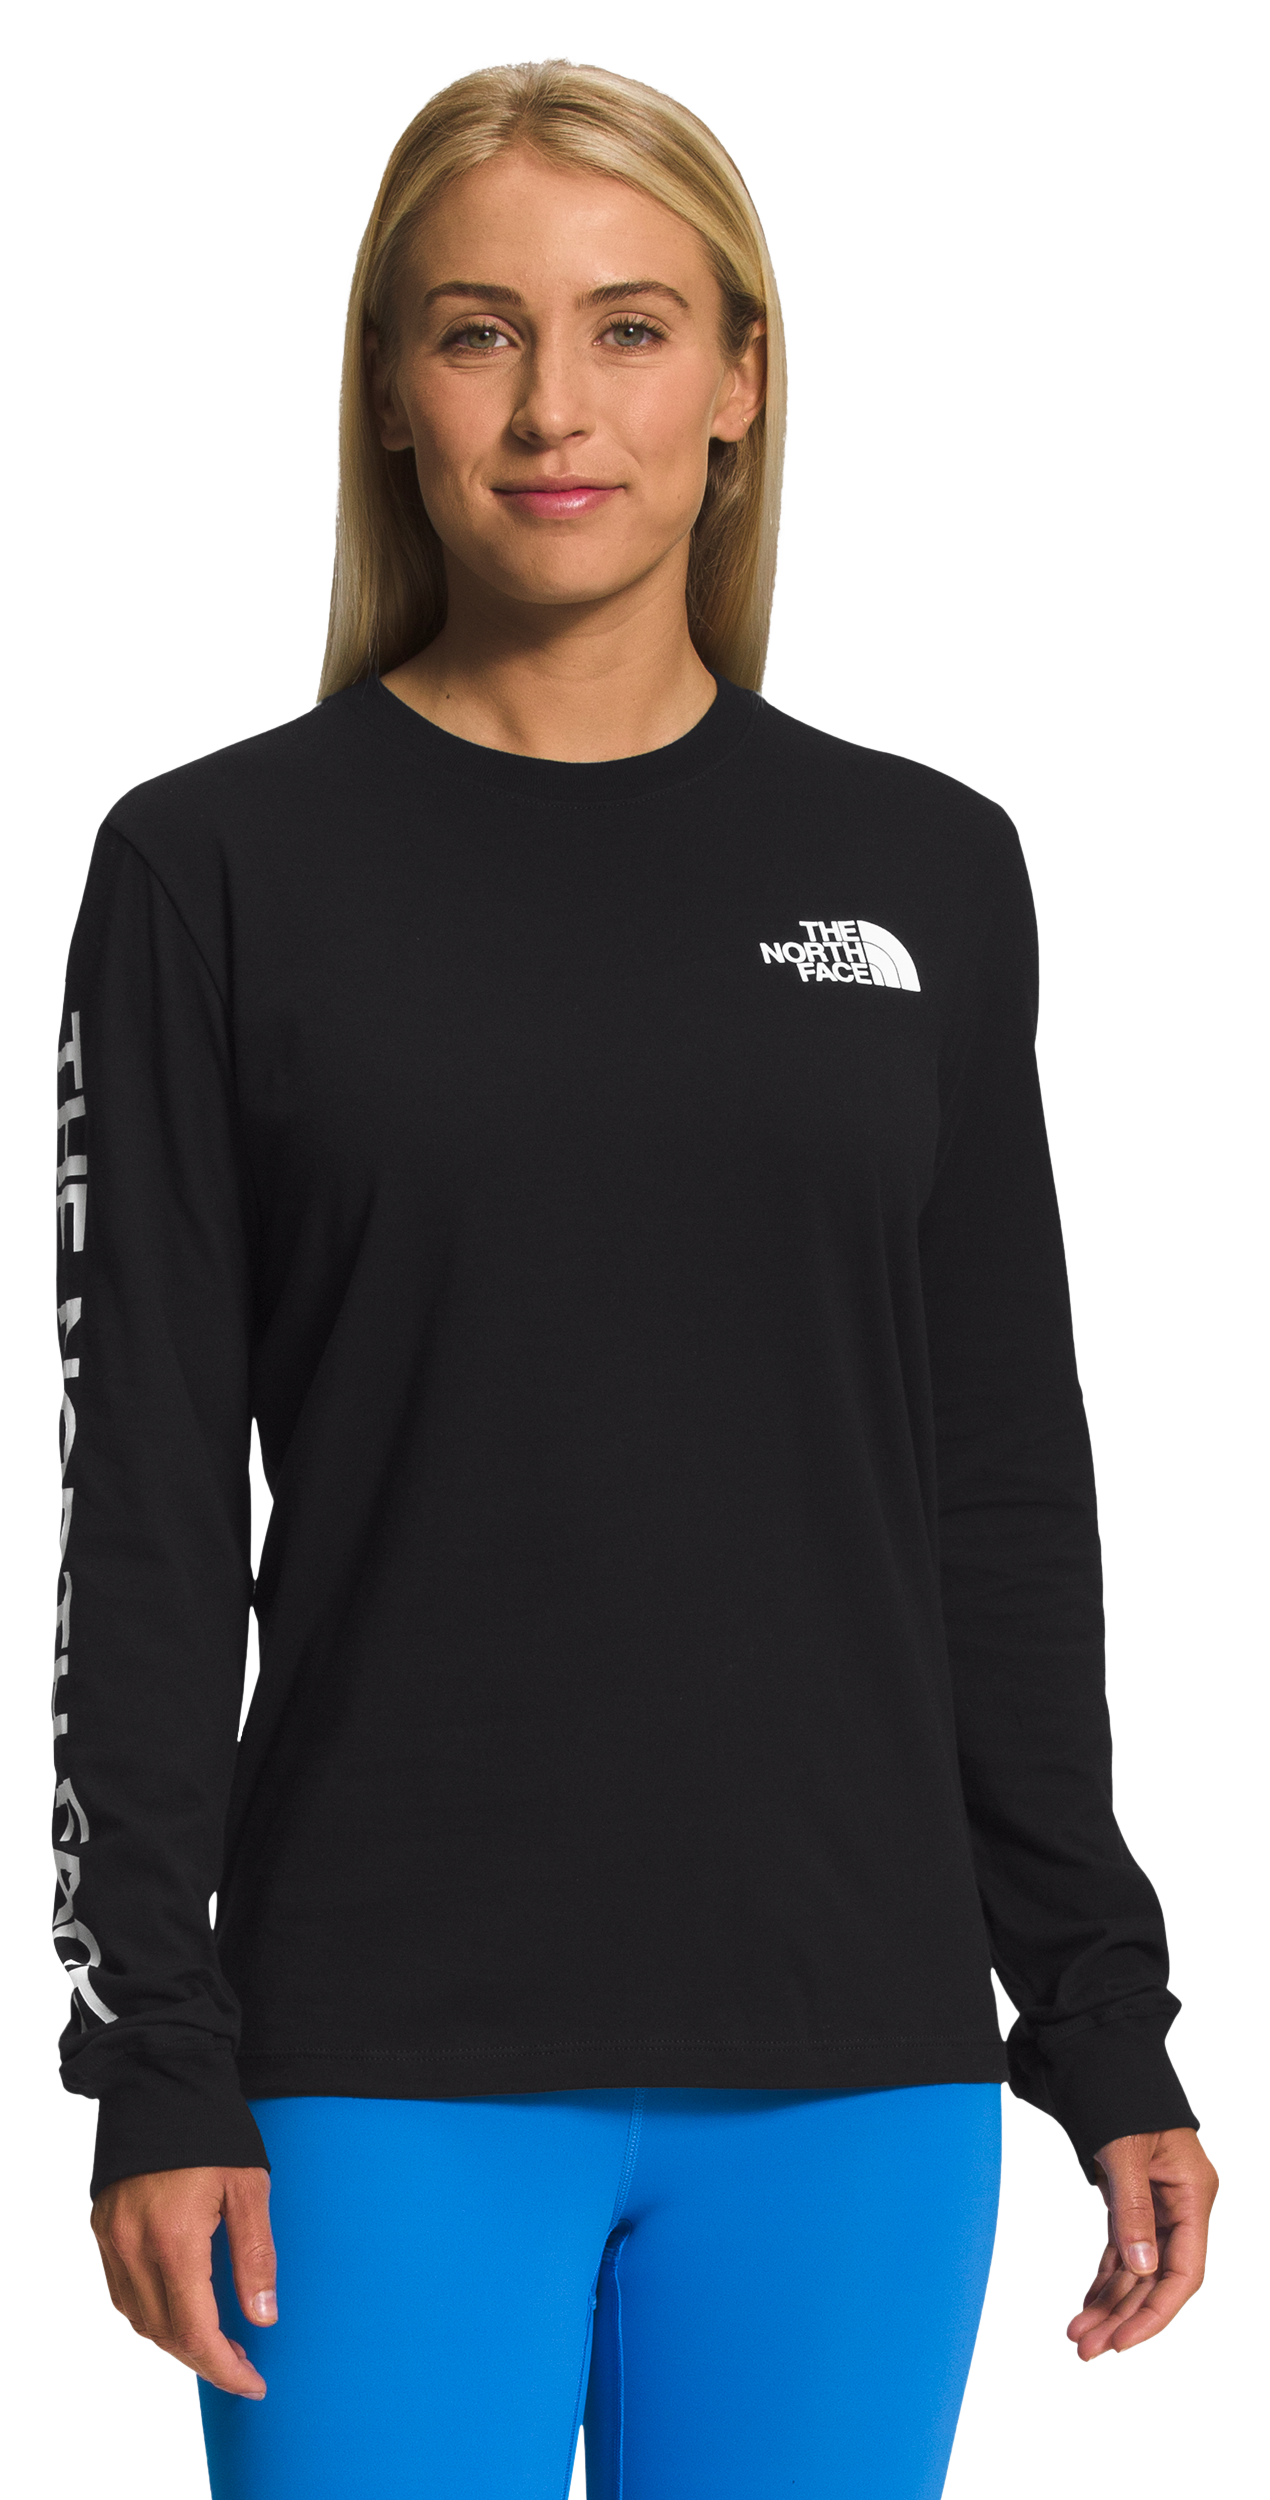 The North Face Hit Graphic Long-Sleeve T-Shirt for Ladies - TNF Black/TNF White - L